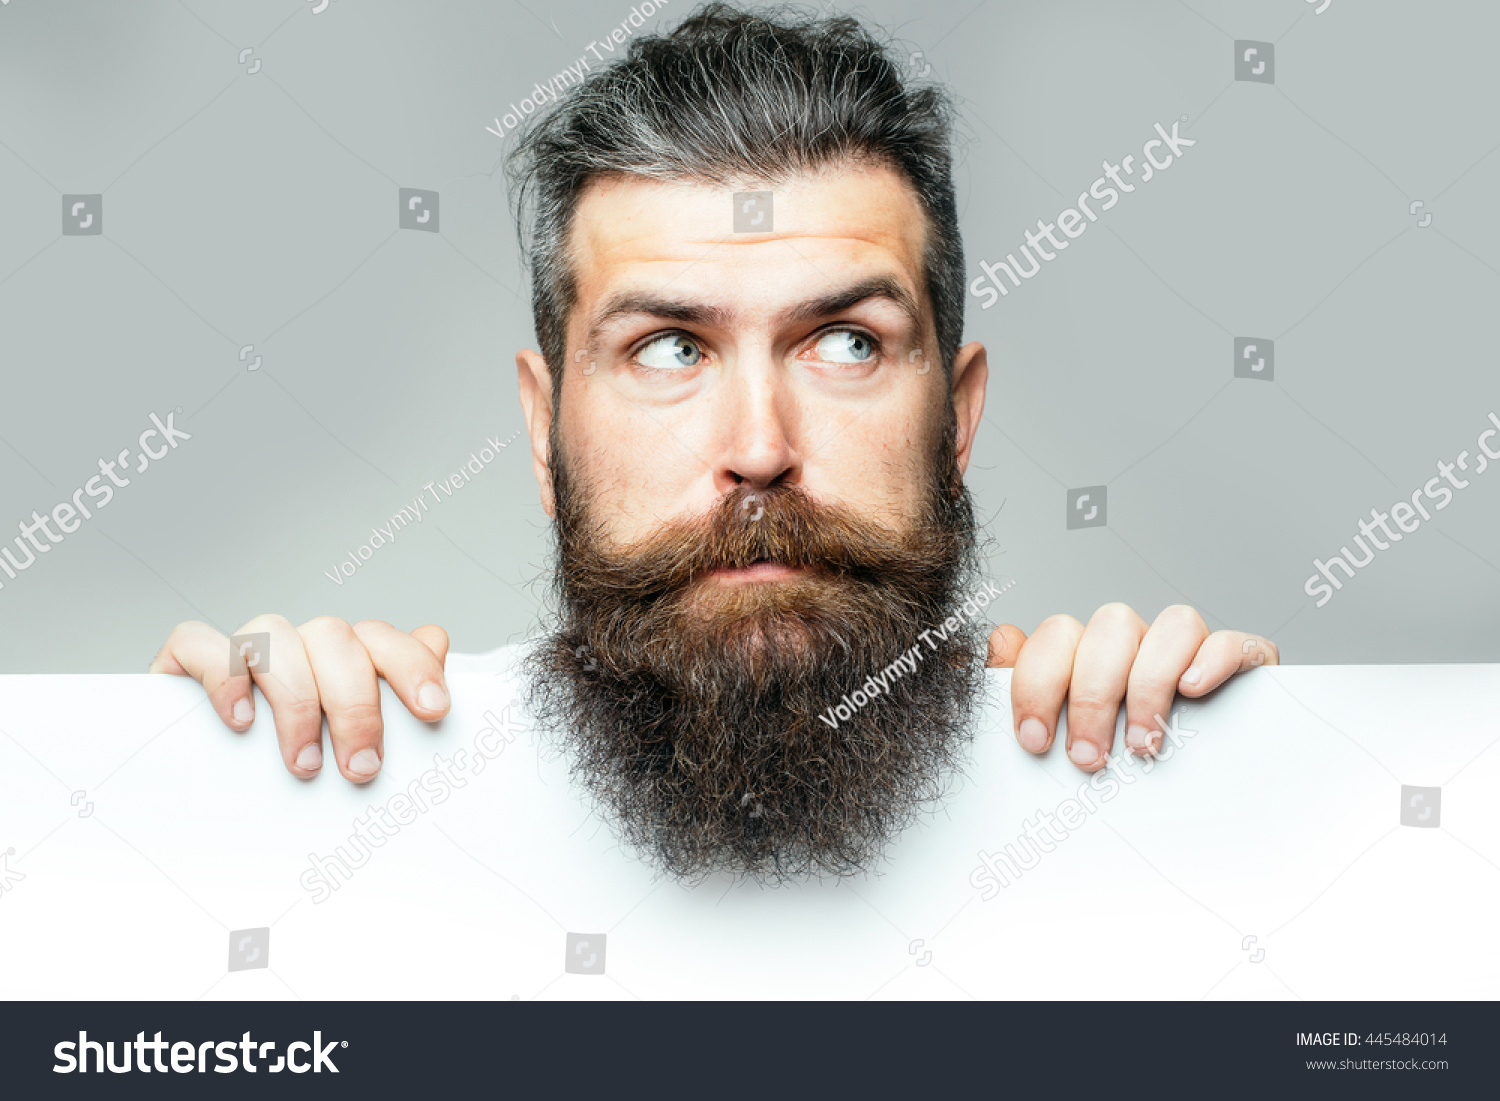 handsome bearded man with long lush beard and moustache on surprised face with white paper sheet in studio on grey background, copy space #445484014